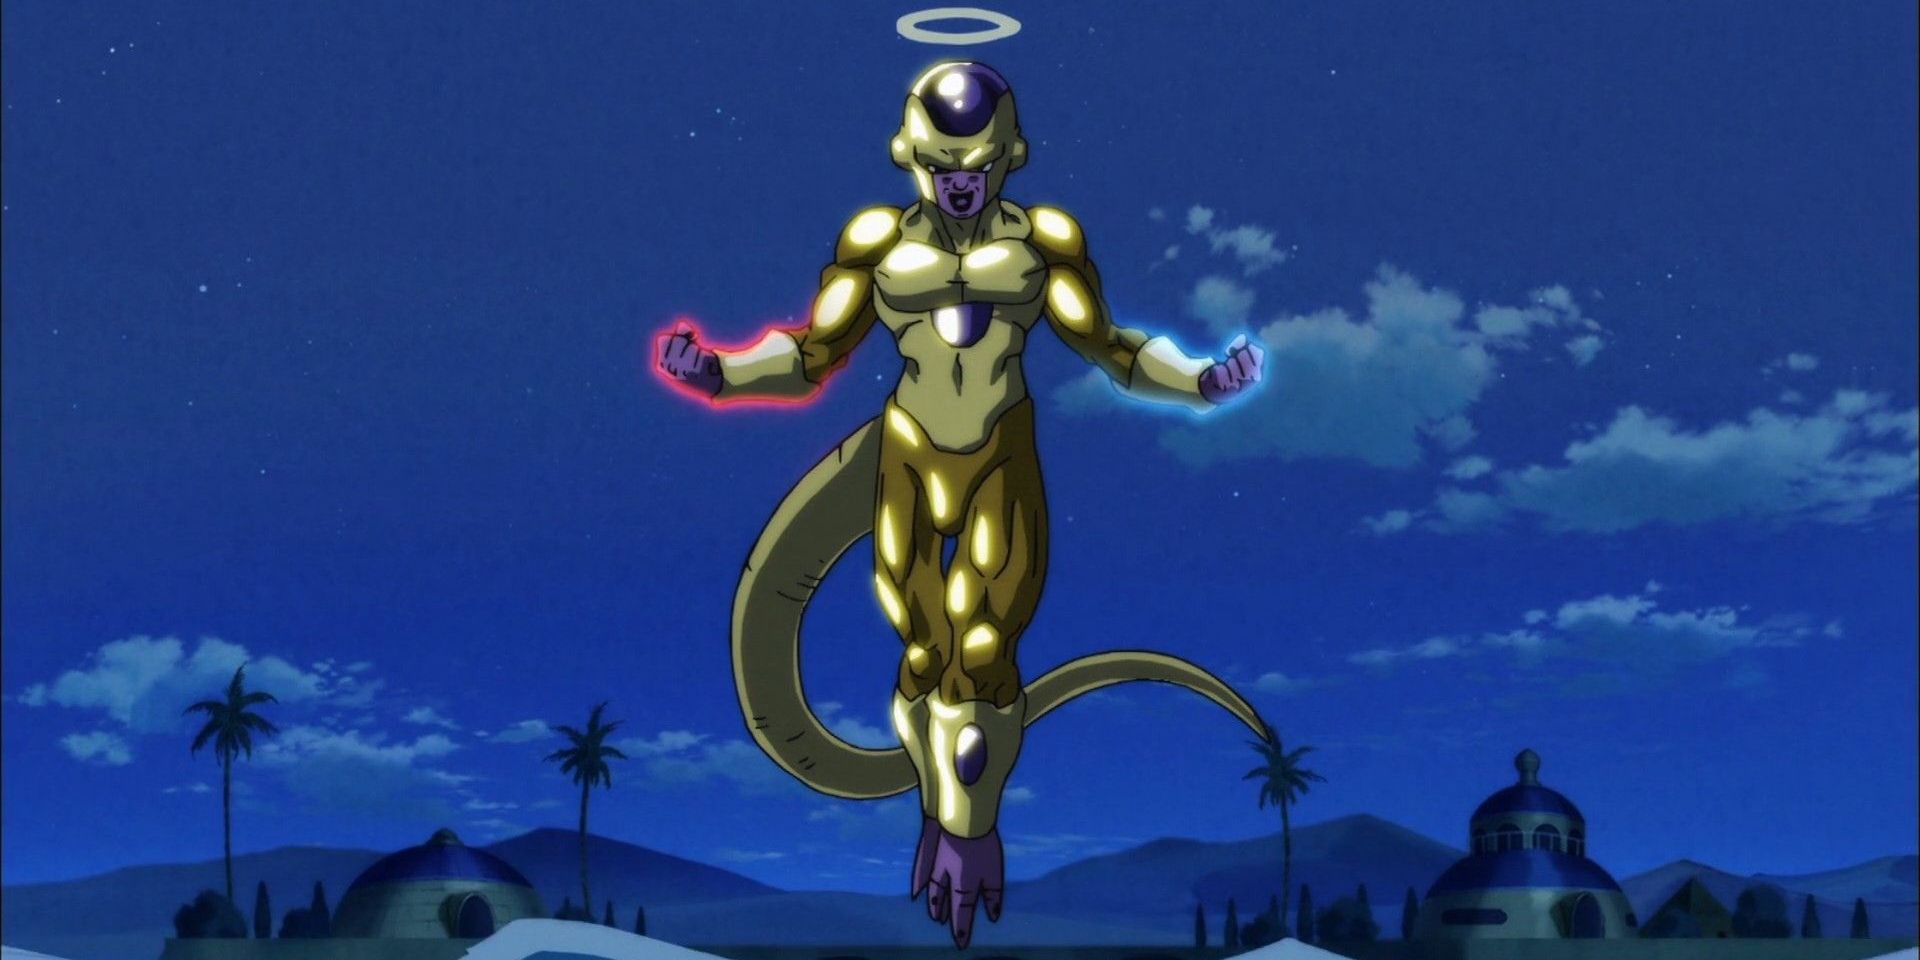 True Golden Frieza showcases the balance of his power in Dragon Ball Super